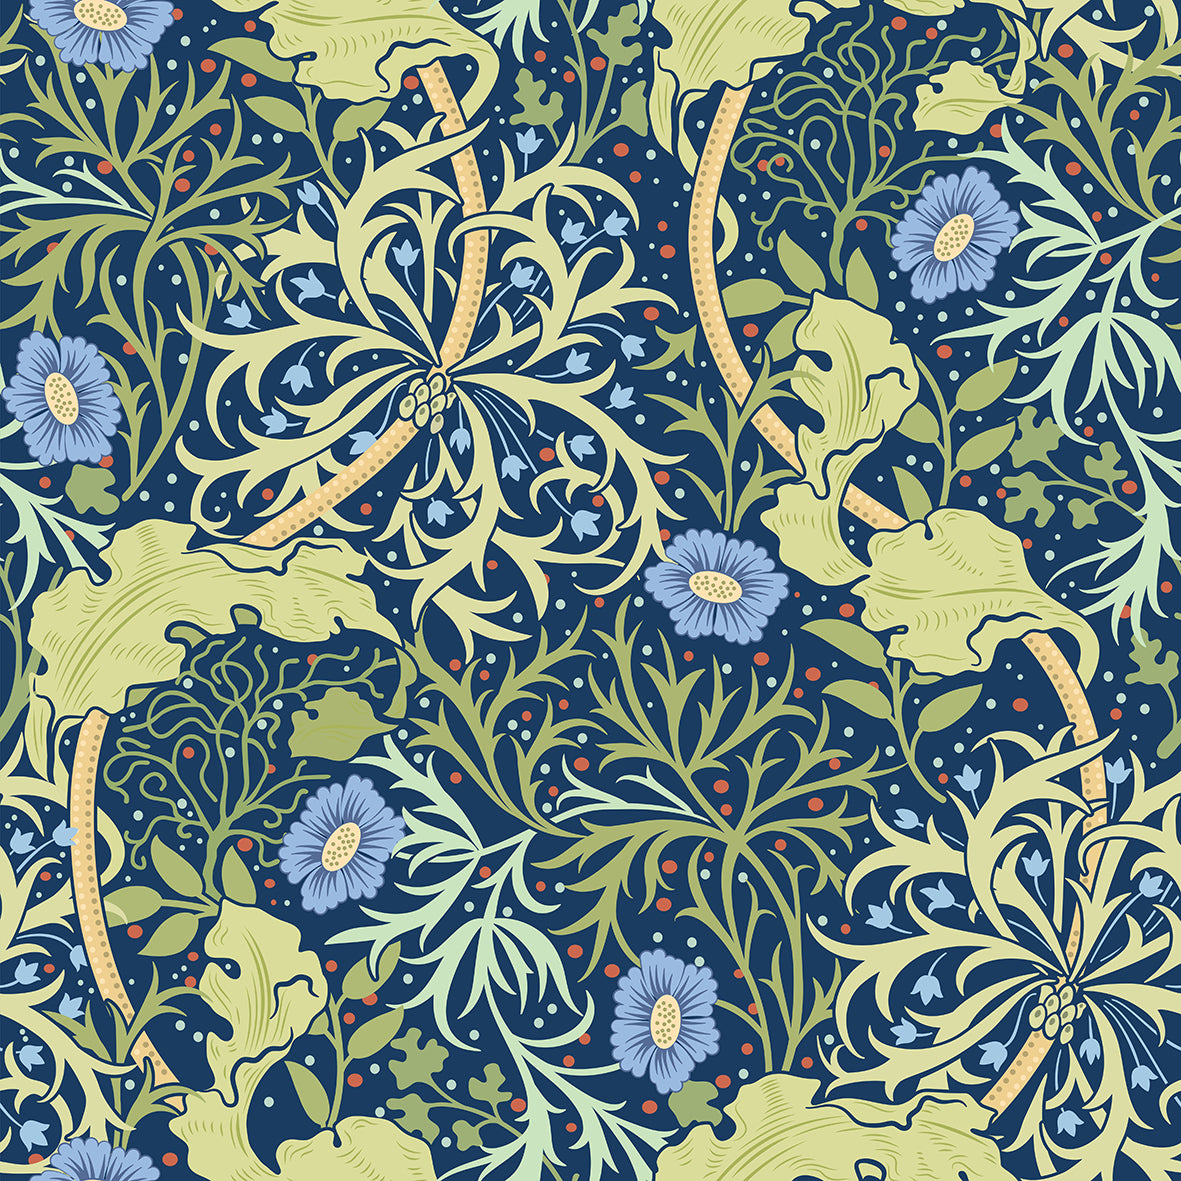 william-morris-co-comforter-seaweed-collection-blue-flower-2